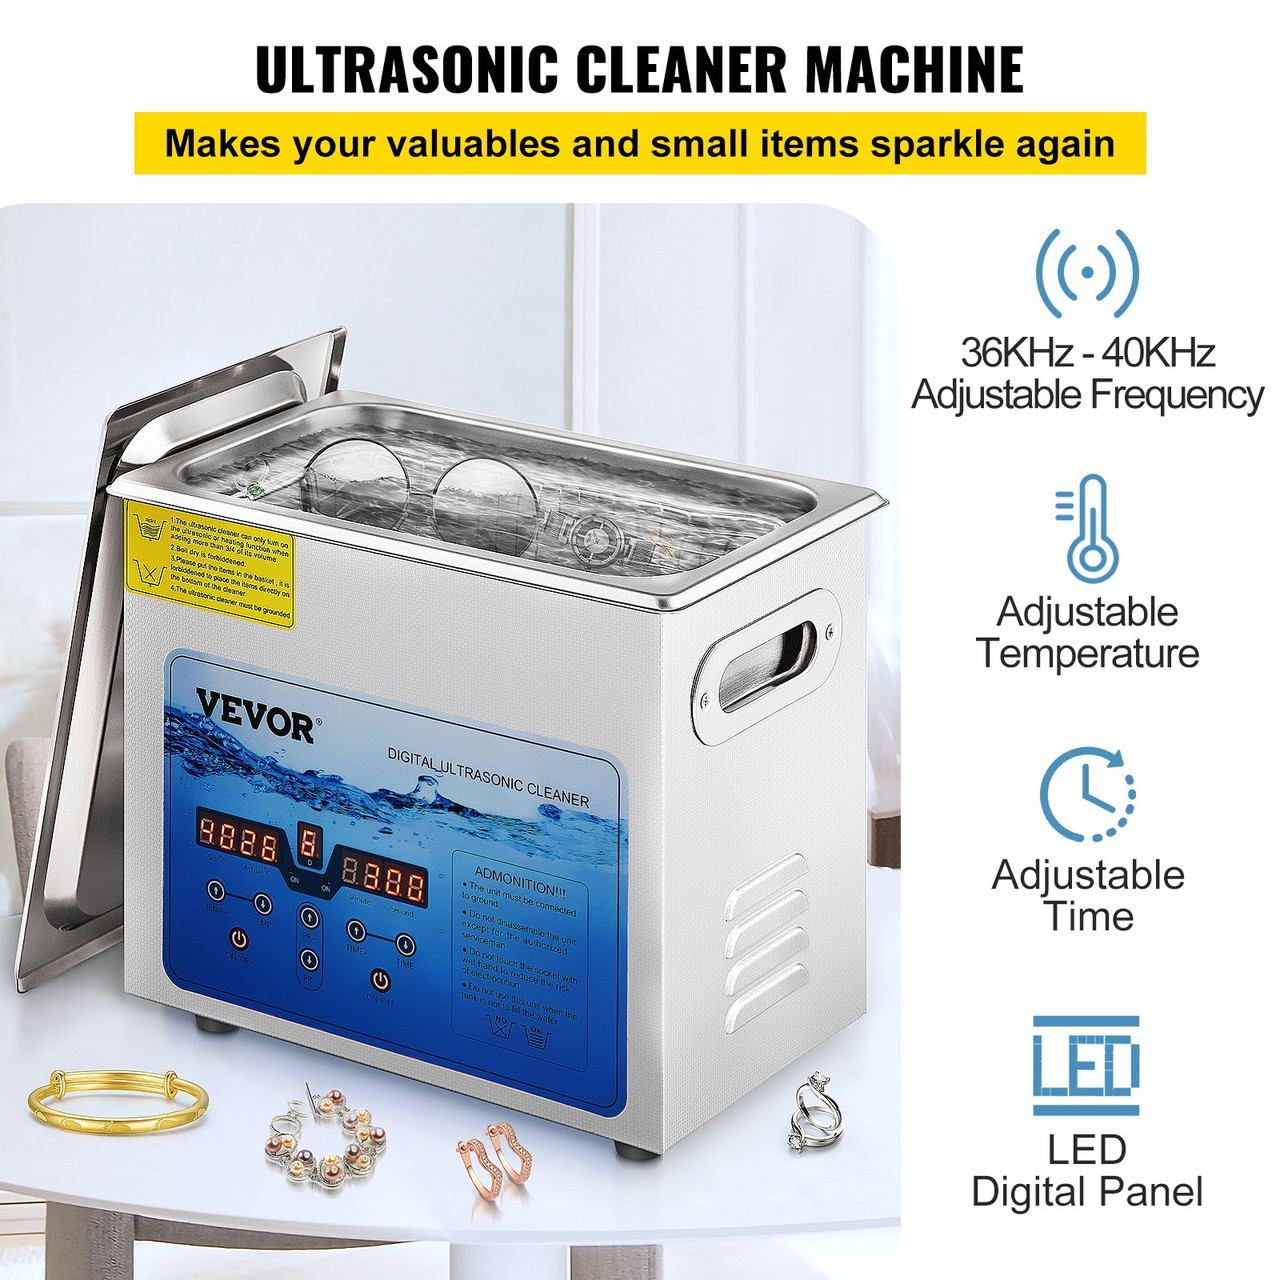 Ultrasonic Cleaner, 36KHz~40KHz Adjustable Frequency, 3L 110V, Ultrasonic Cleaning Machine w/Digital Timer and Heater, Lab Sonic Cleaner for Jewelry Watch Eyeglasses Coins, FCC/CE/RoHS Listed